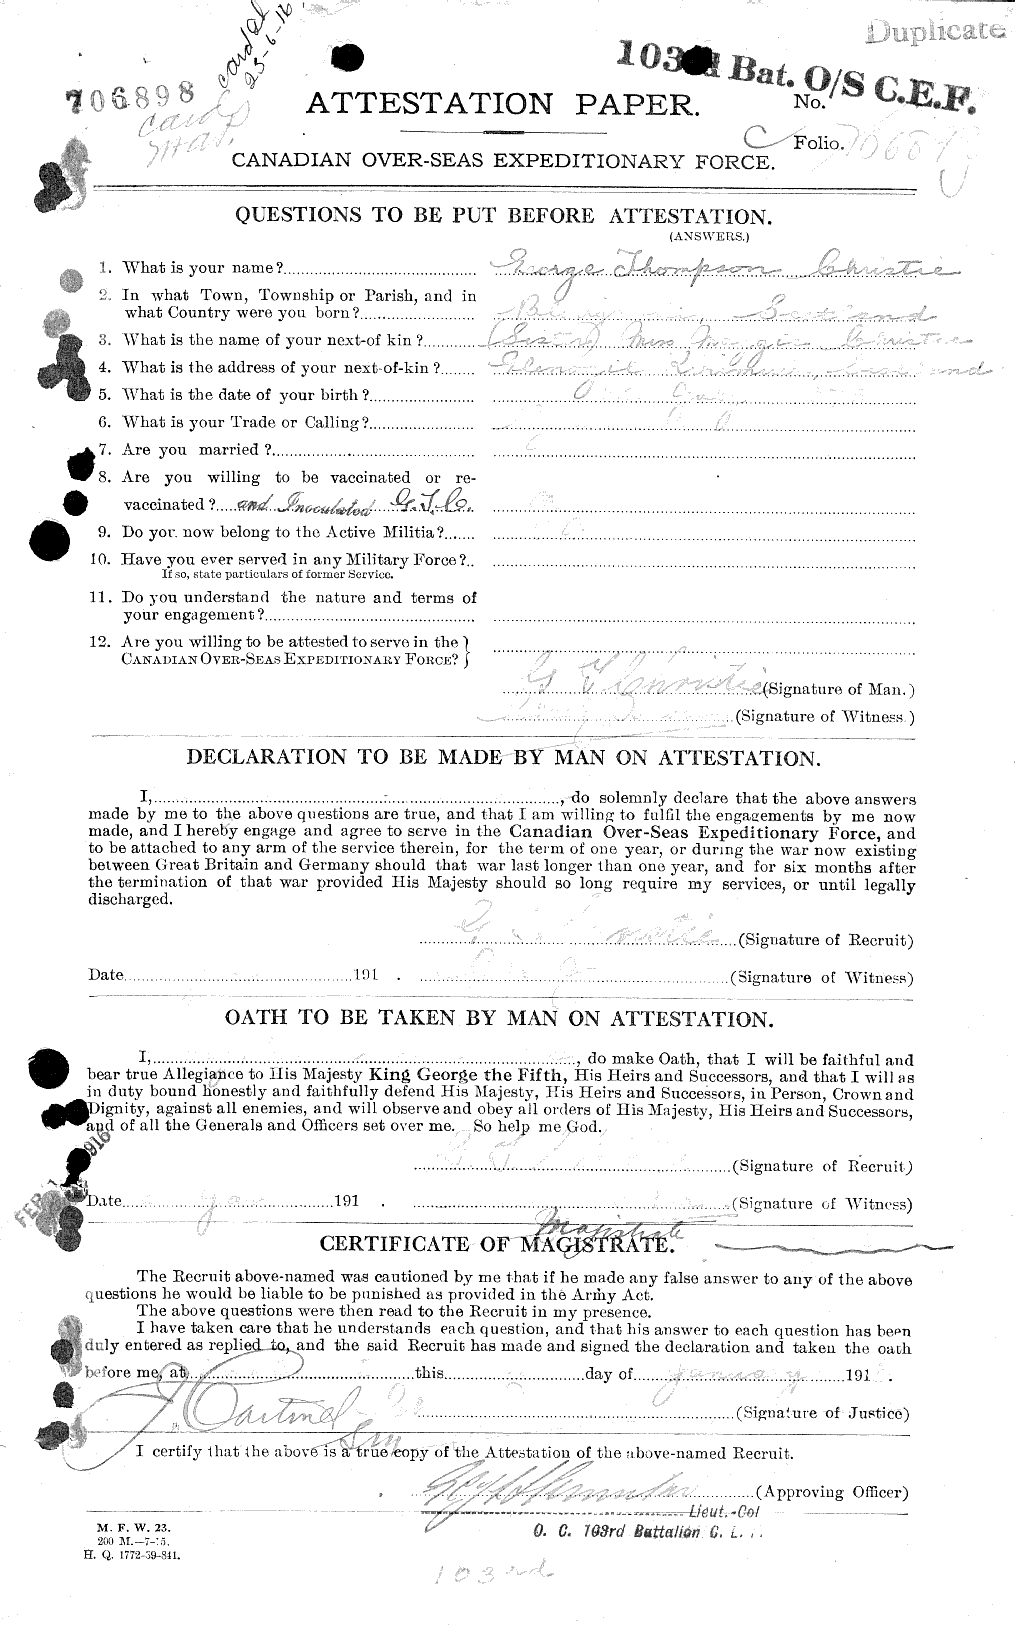 Personnel Records of the First World War - CEF 021950a